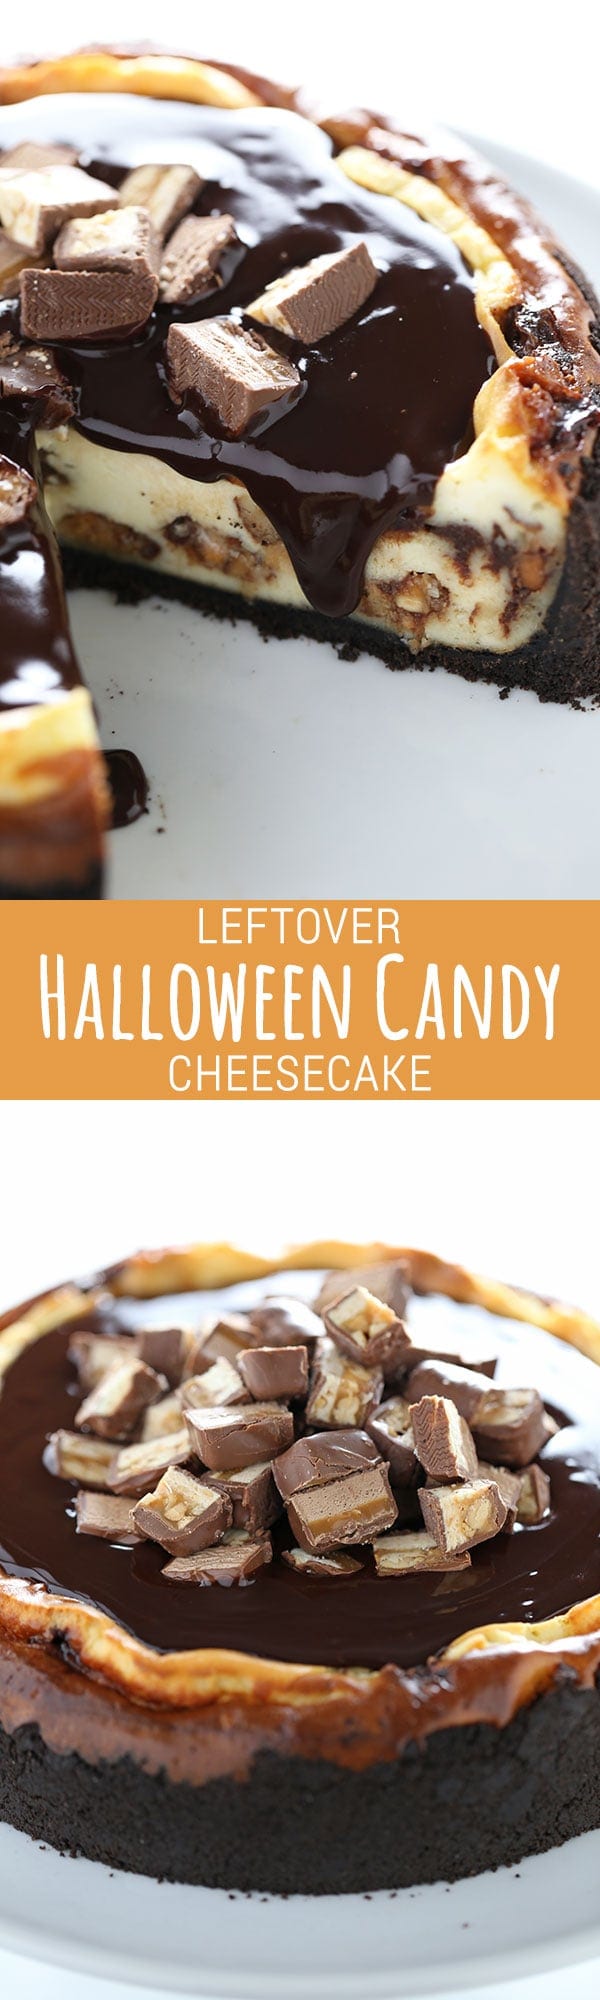 YES! This is PERFECT! Leftover Halloween Candy Cheesecake using up ALL those Snickers, Twix, Reese's, Milkyway taking up space in your pantry in one over-the-top cheesecake recipe!